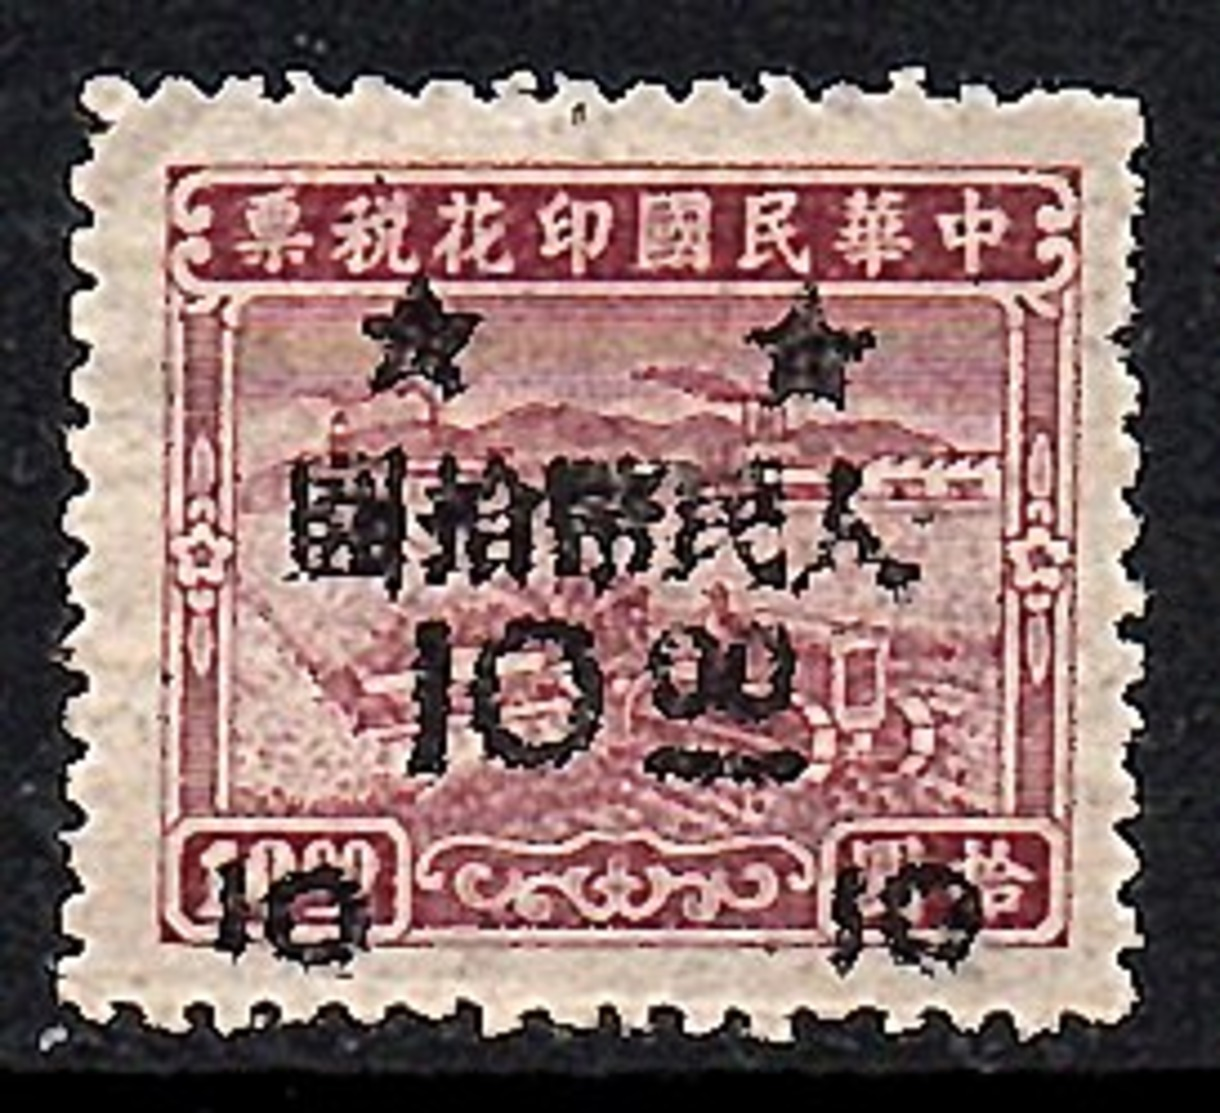 UNLISTED $10 Probably East China, Unlisted In Paau, Wettering And Padget Catalogues MH (209) - Western-China 1949-50